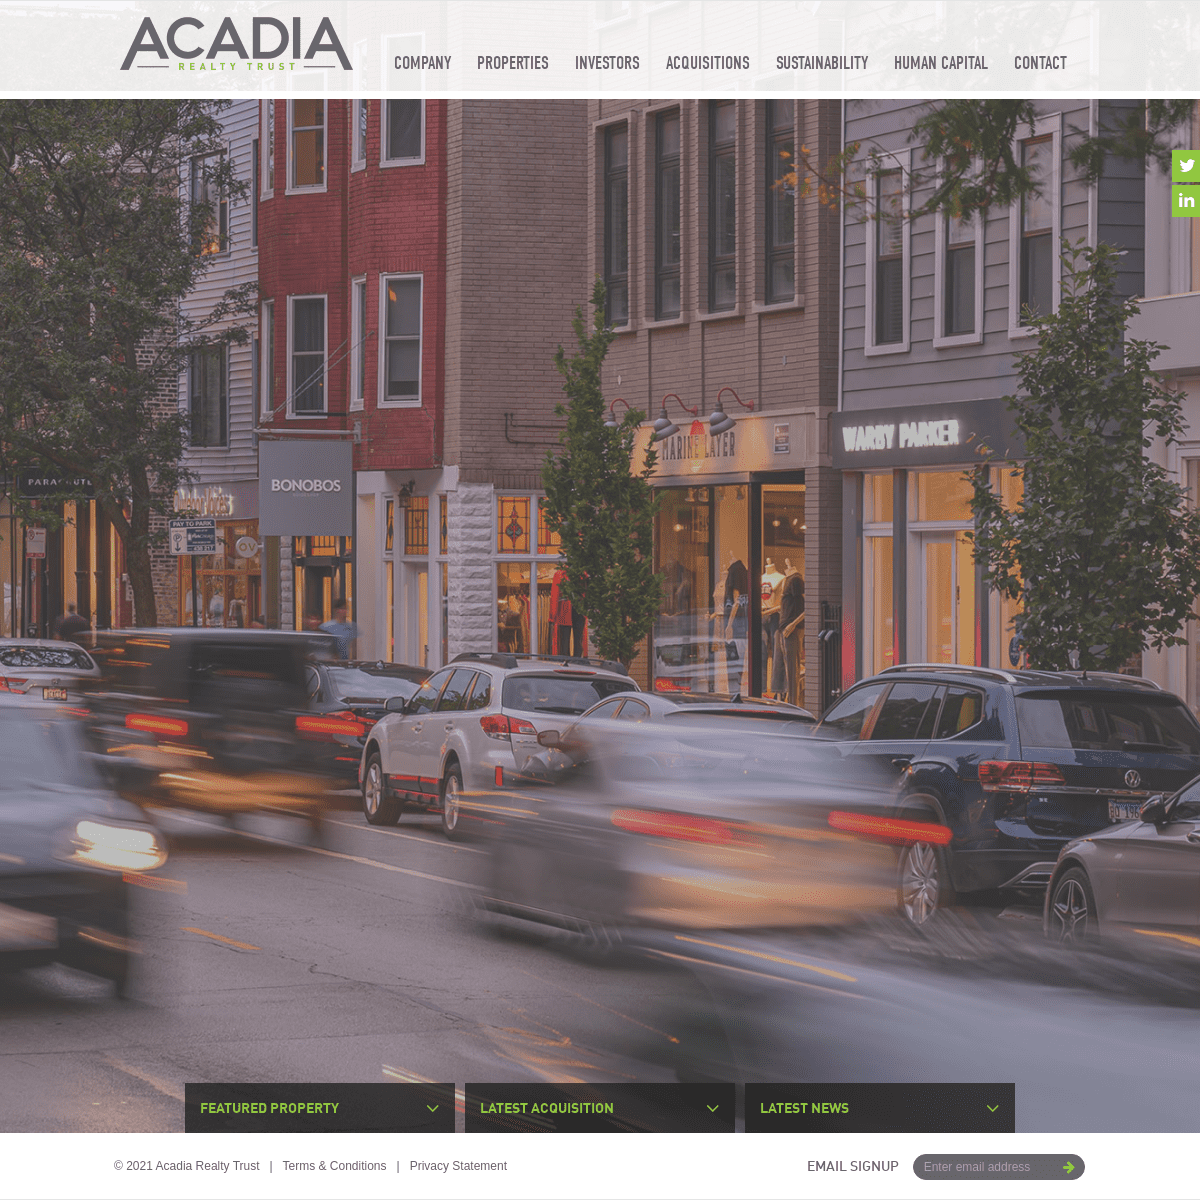 A complete backup of https://acadiarealty.com